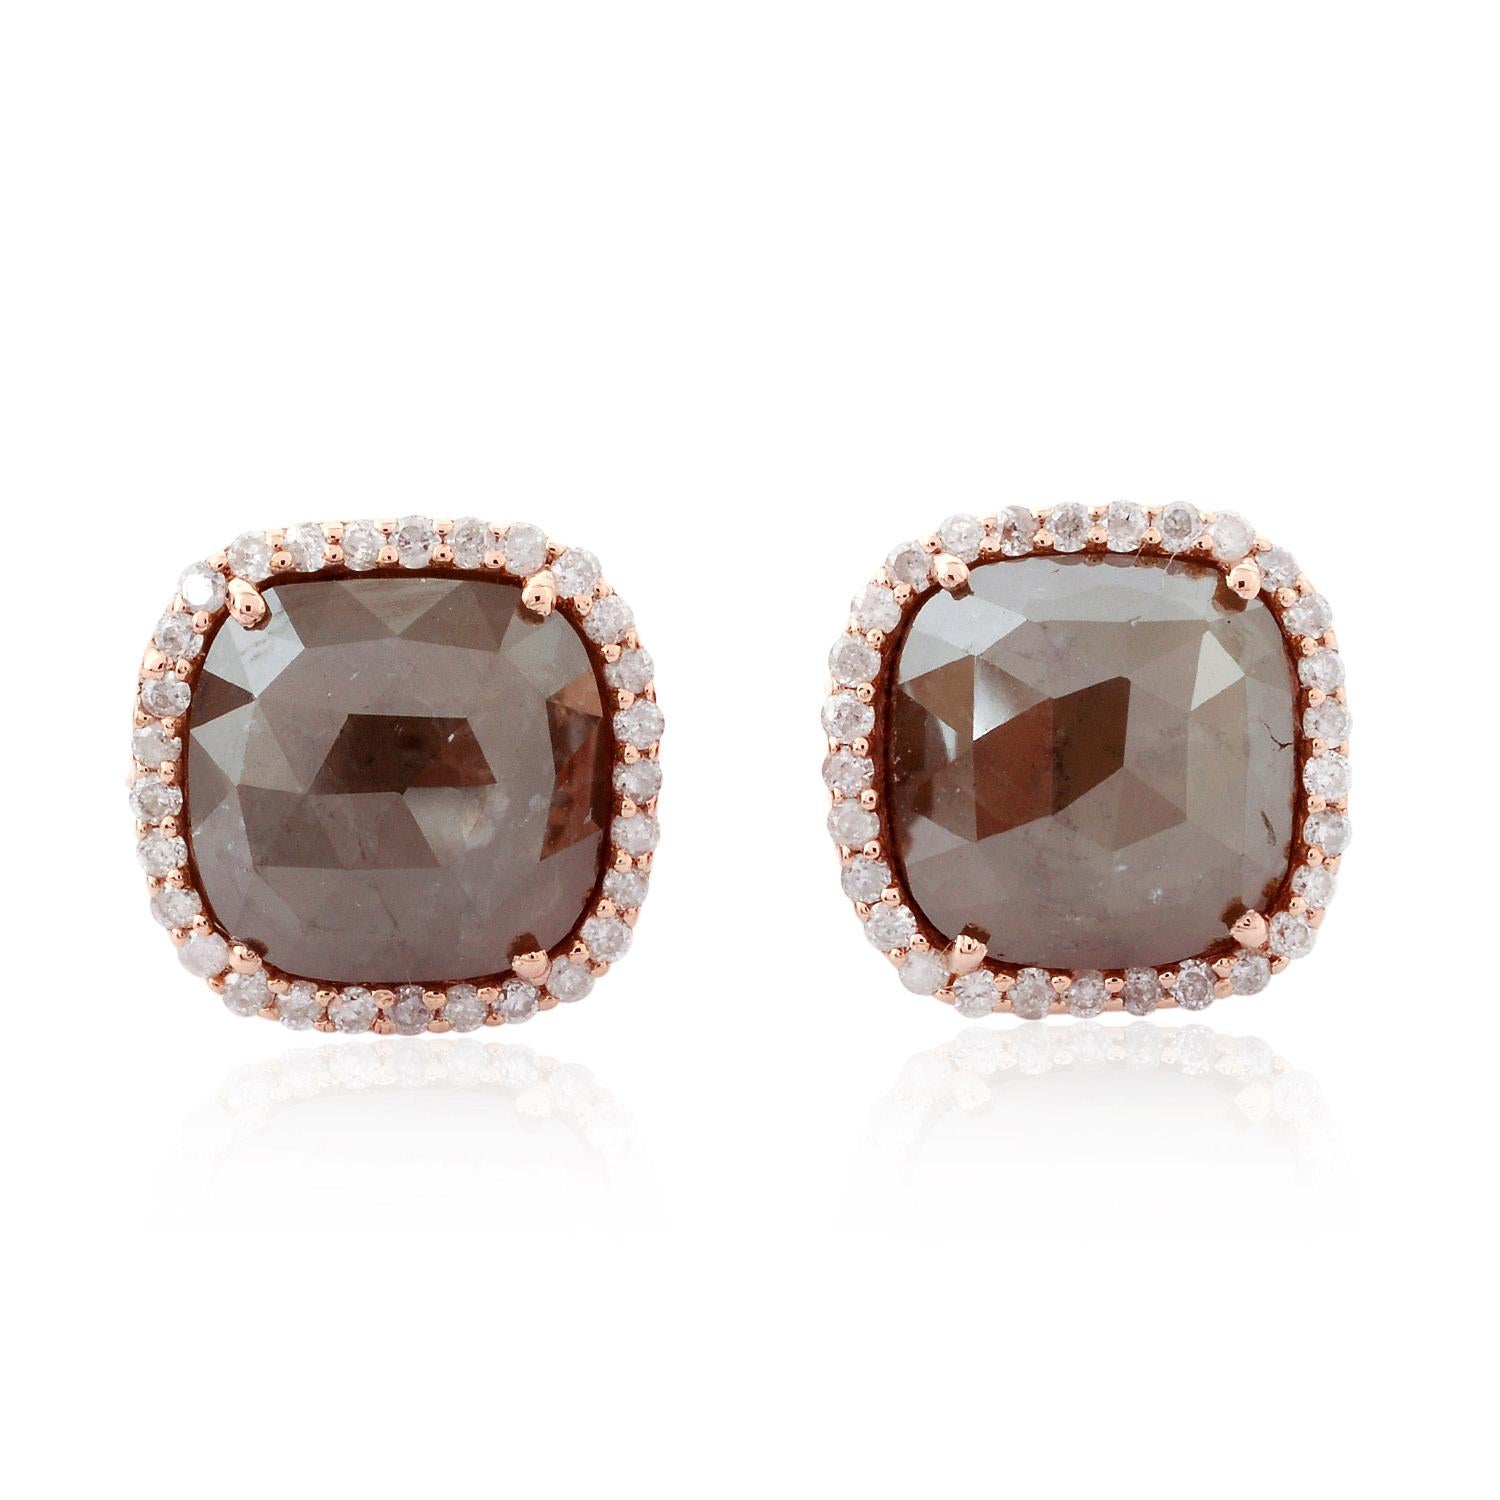 Mixed Cut Cushion Cut Ice Diamond Stud Earrings with Pave Diamonds Made in 18k Rose Gold For Sale